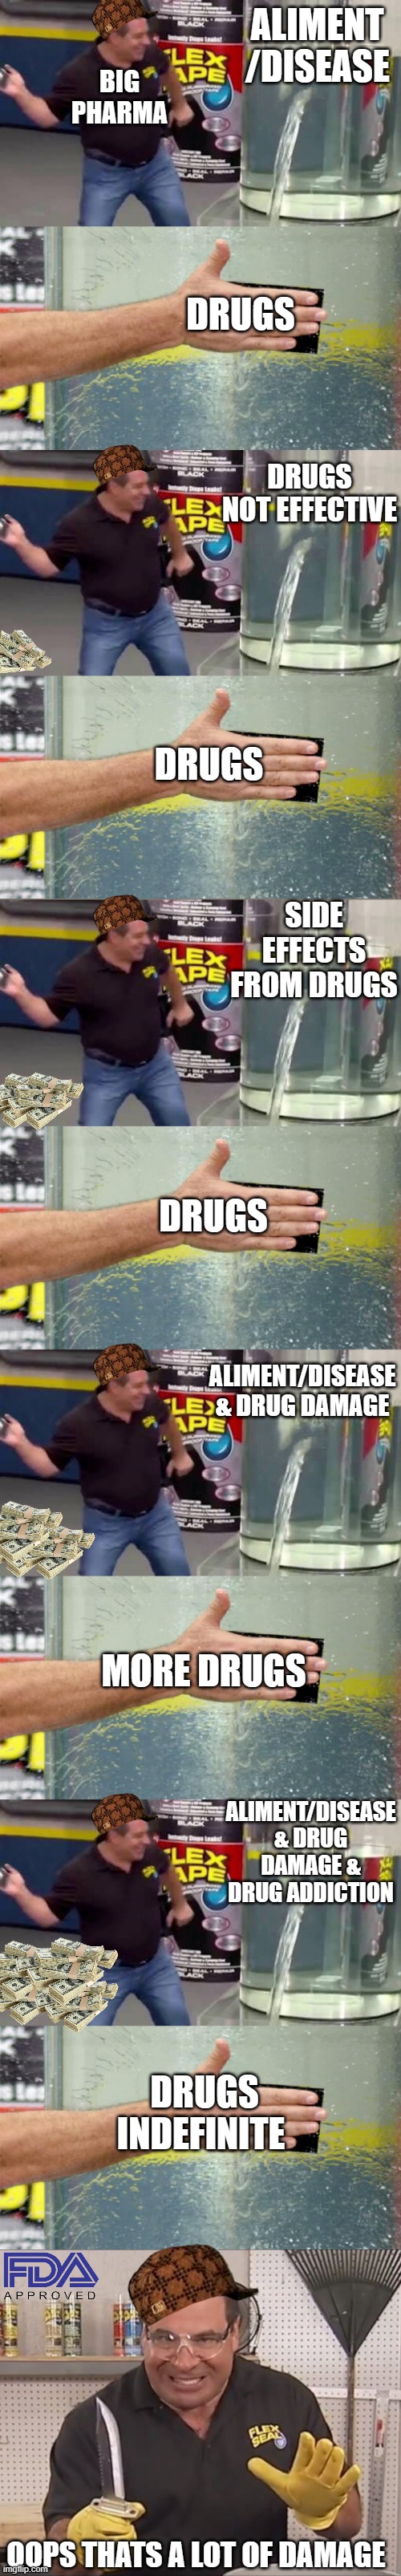 The Viscous Cycle | ALIMENT /DISEASE; BIG PHARMA; DRUGS; DRUGS NOT EFFECTIVE; DRUGS; SIDE EFFECTS FROM DRUGS; DRUGS; ALIMENT/DISEASE & DRUG DAMAGE; MORE DRUGS; ALIMENT/DISEASE & DRUG DAMAGE & DRUG ADDICTION; DRUGS INDEFINITE; OOPS THATS A LOT OF DAMAGE | image tagged in flex tape,that's alot of damage,big pharma,drug dealer,don't do drugs,greed | made w/ Imgflip meme maker